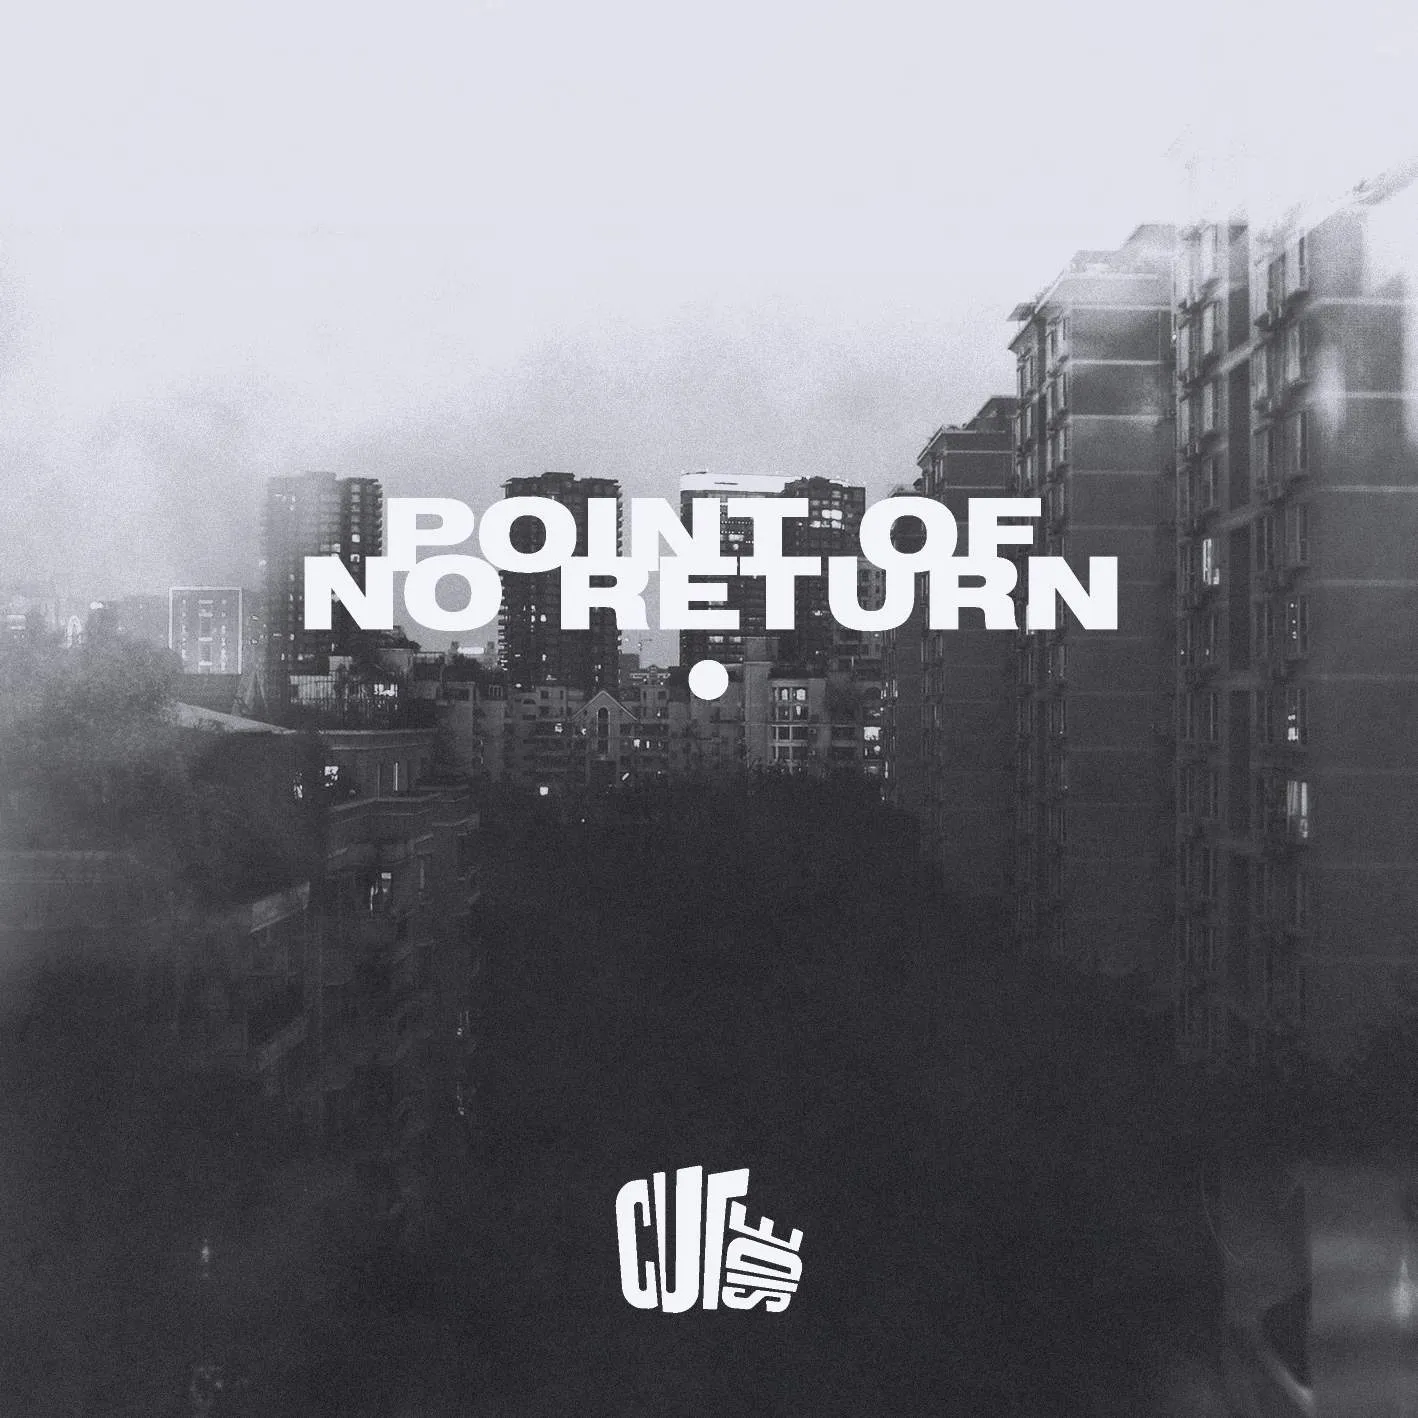 Album cover for “Point Of No Return” by Cutside